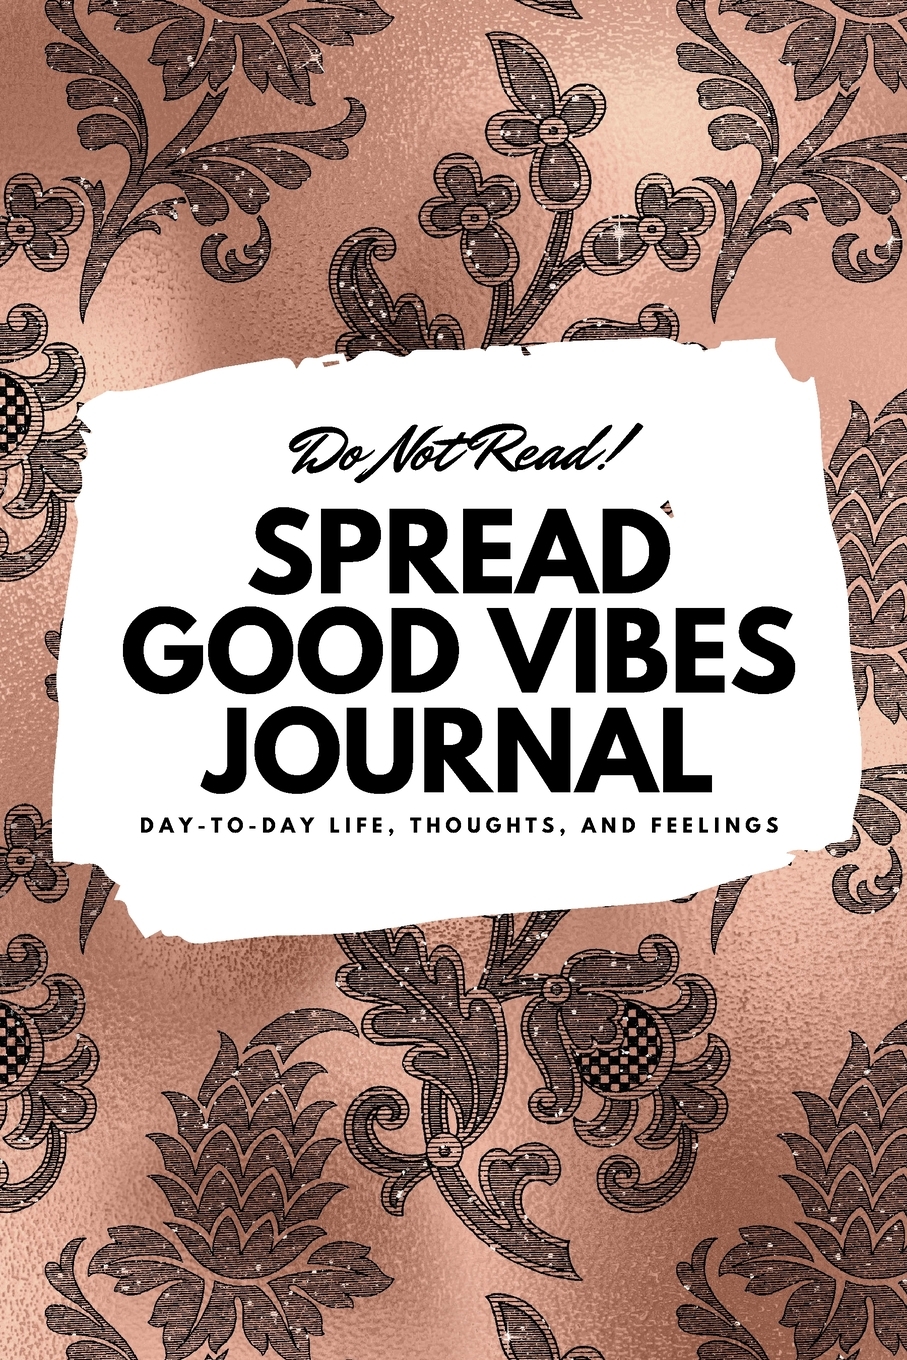 6x9 Blank Journal: Do Not Read! Spread Good Vibes Journal - Small Blank Journal - 6x9 Blank Journal (Softcover Journal / Notebook / Sketchbook / Diary) (Series #36) (Paperback) - image 1 of 1